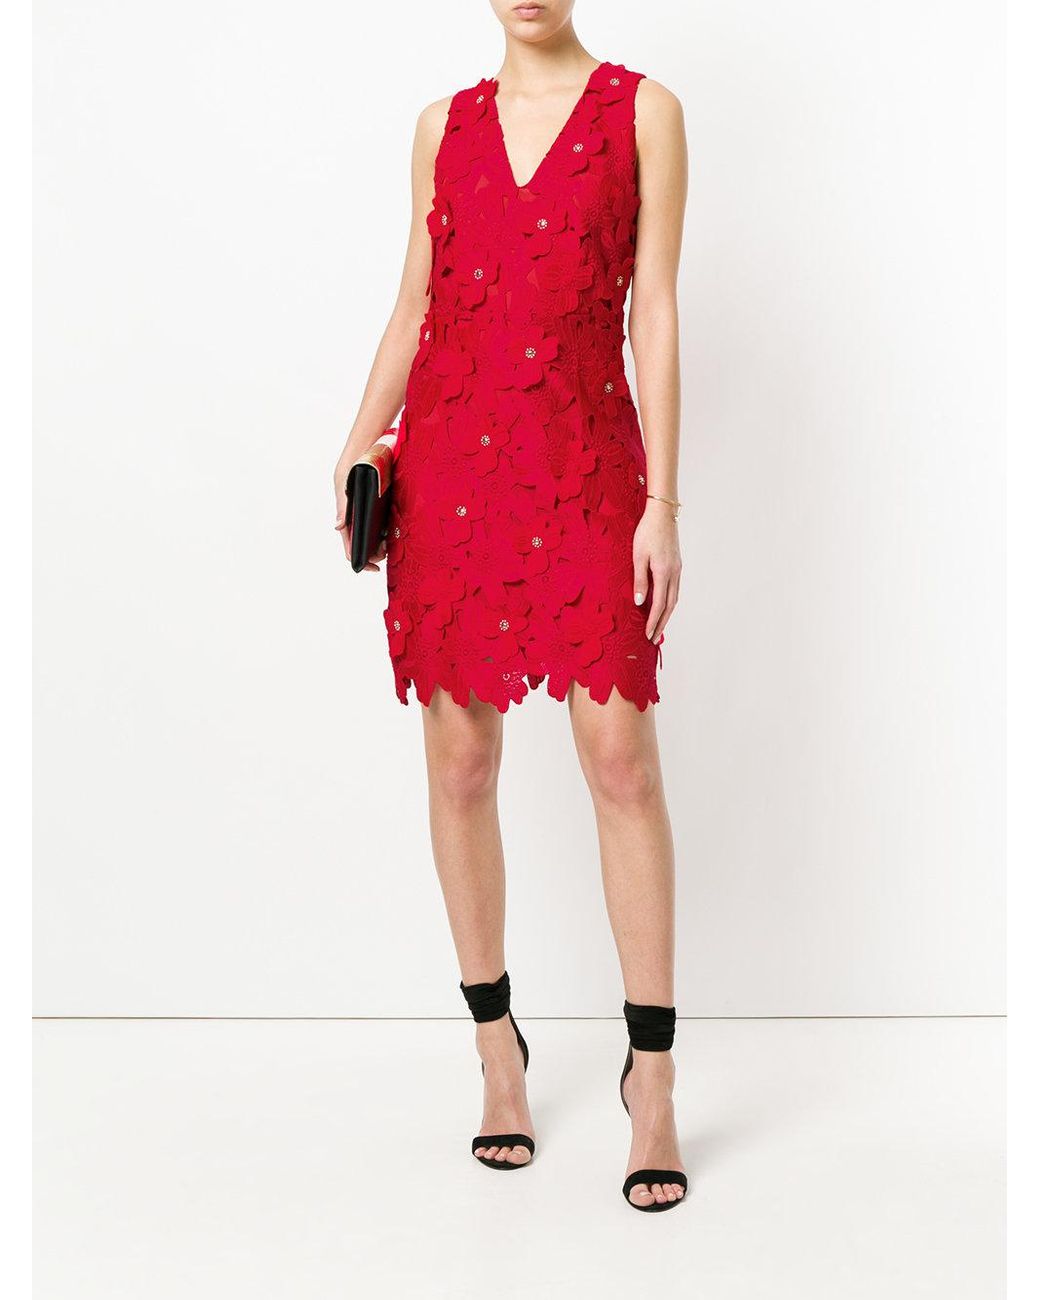 MICHAEL Michael Kors Floral Appliqué Lace Dress in Red | Lyst Canada